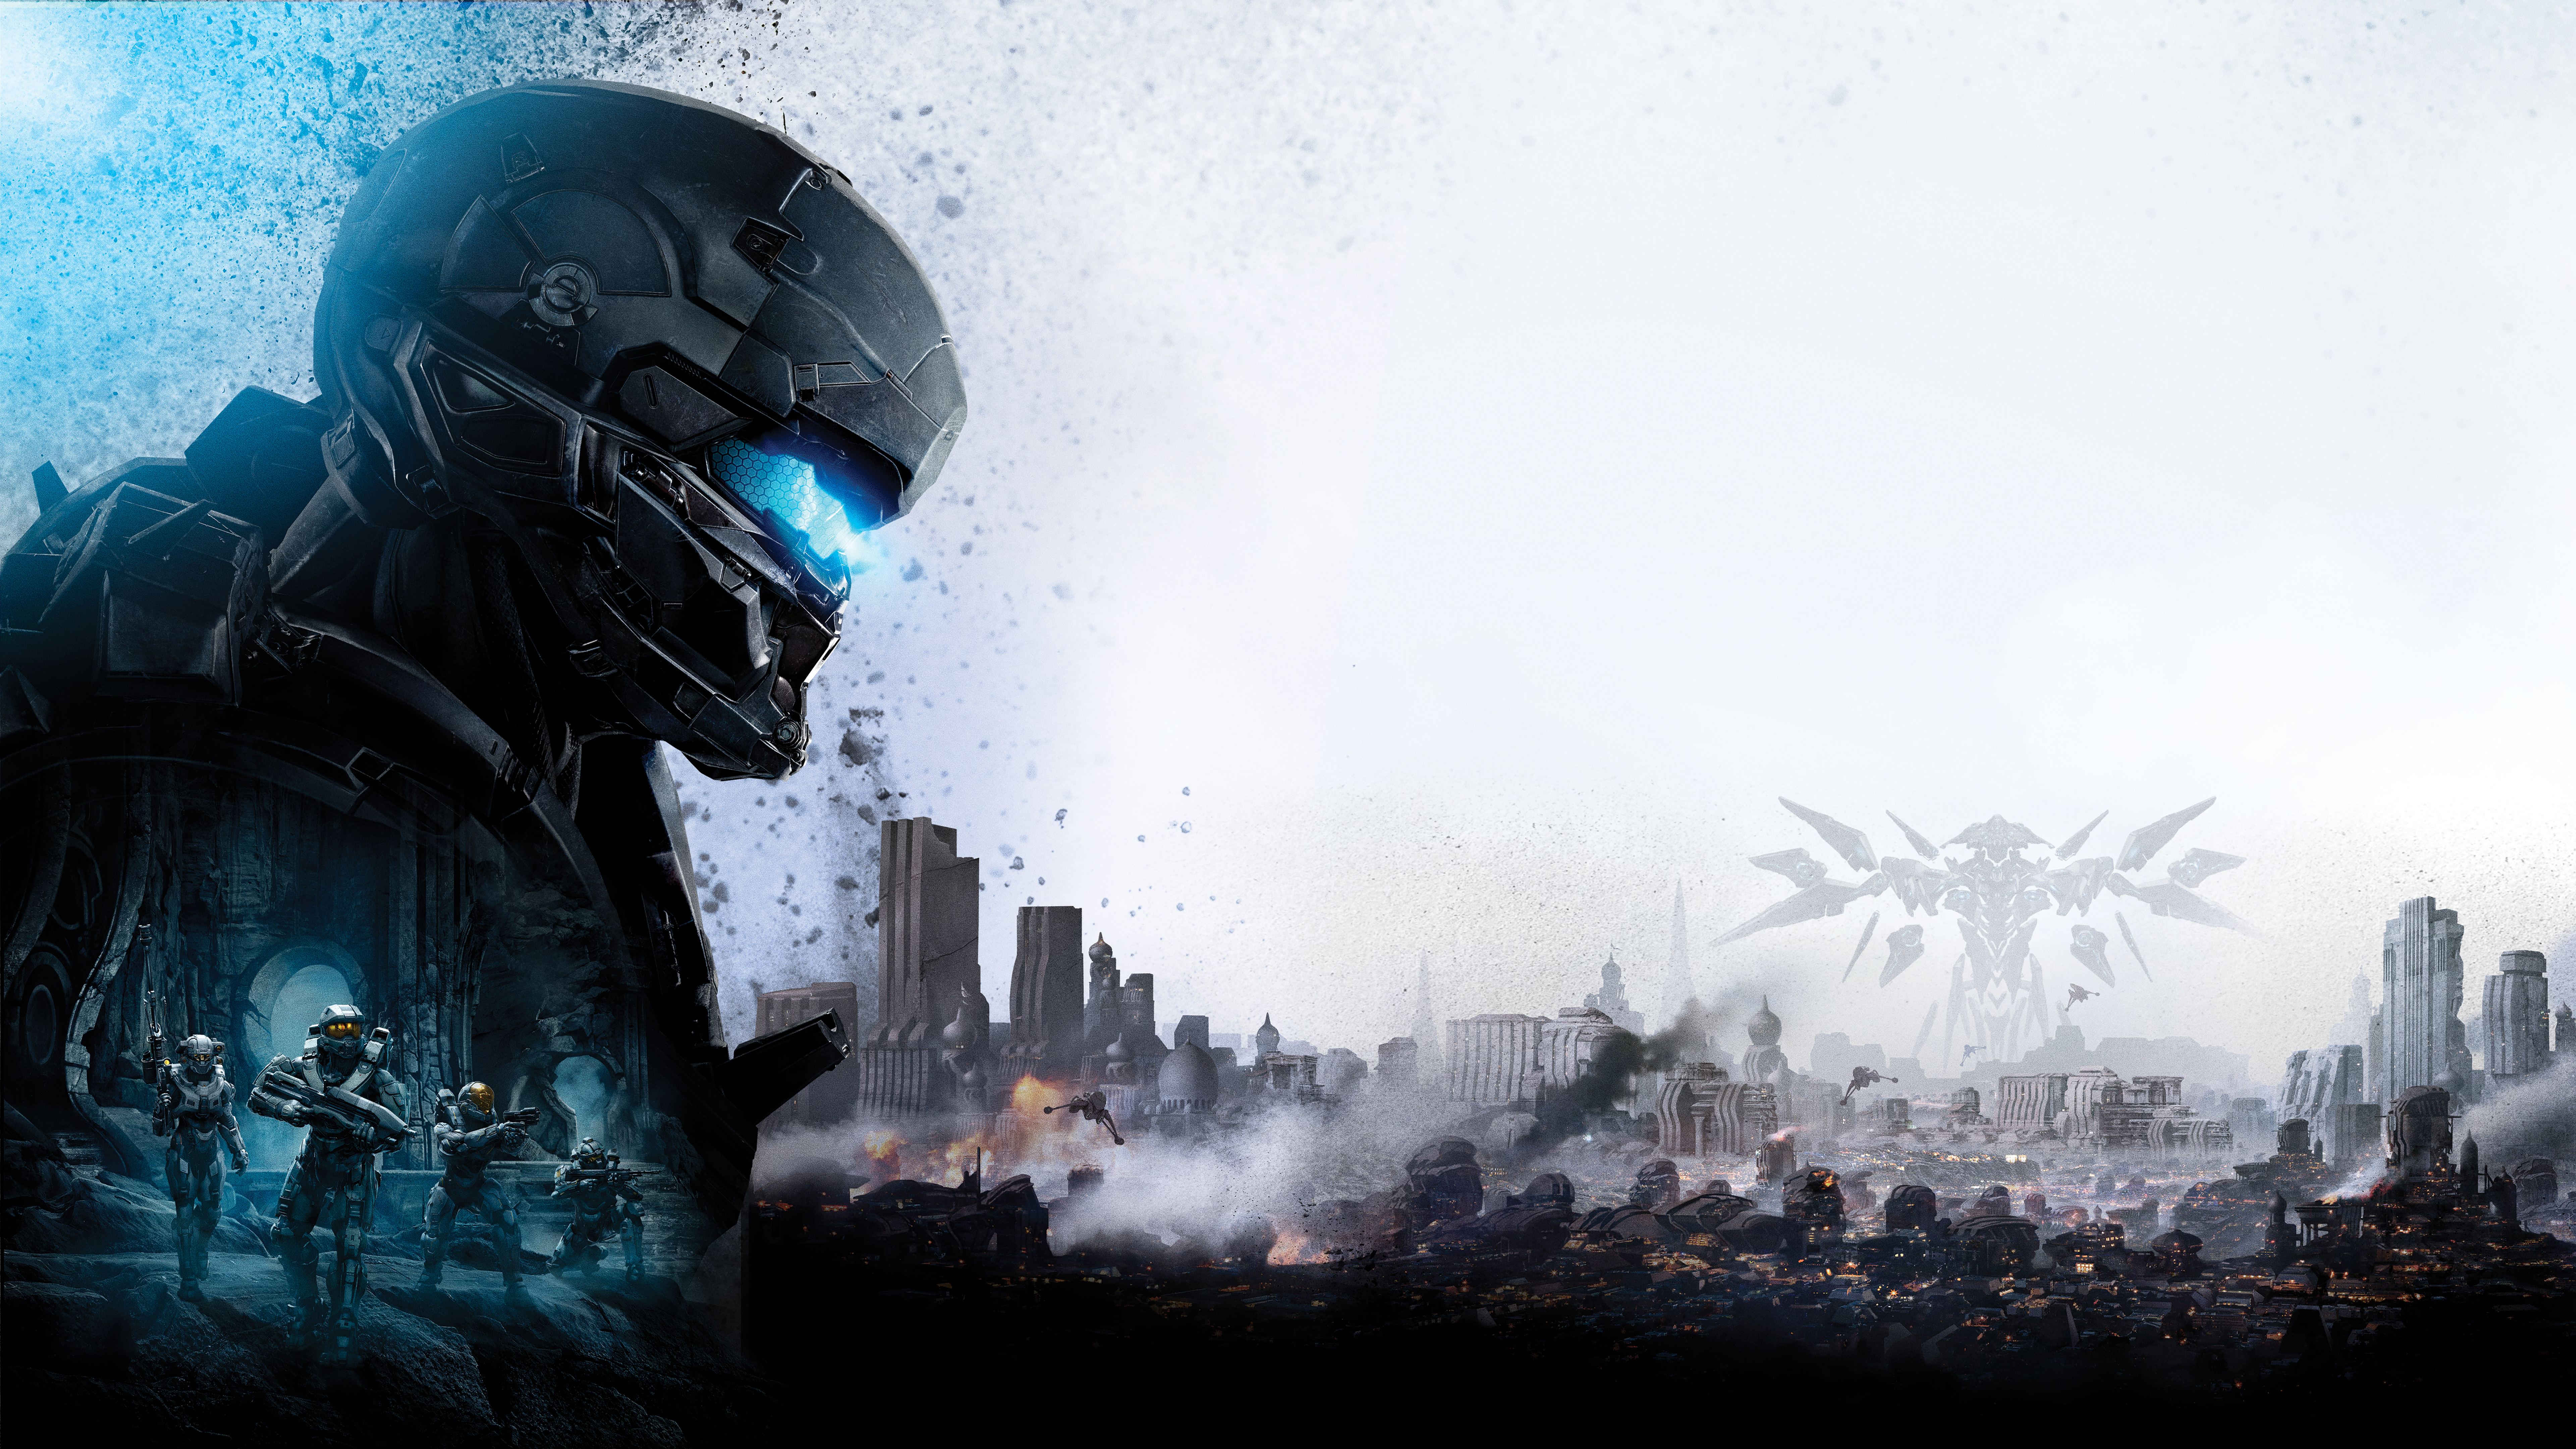 Video Game Halo 5: Guardians HD Wallpaper | Background Image